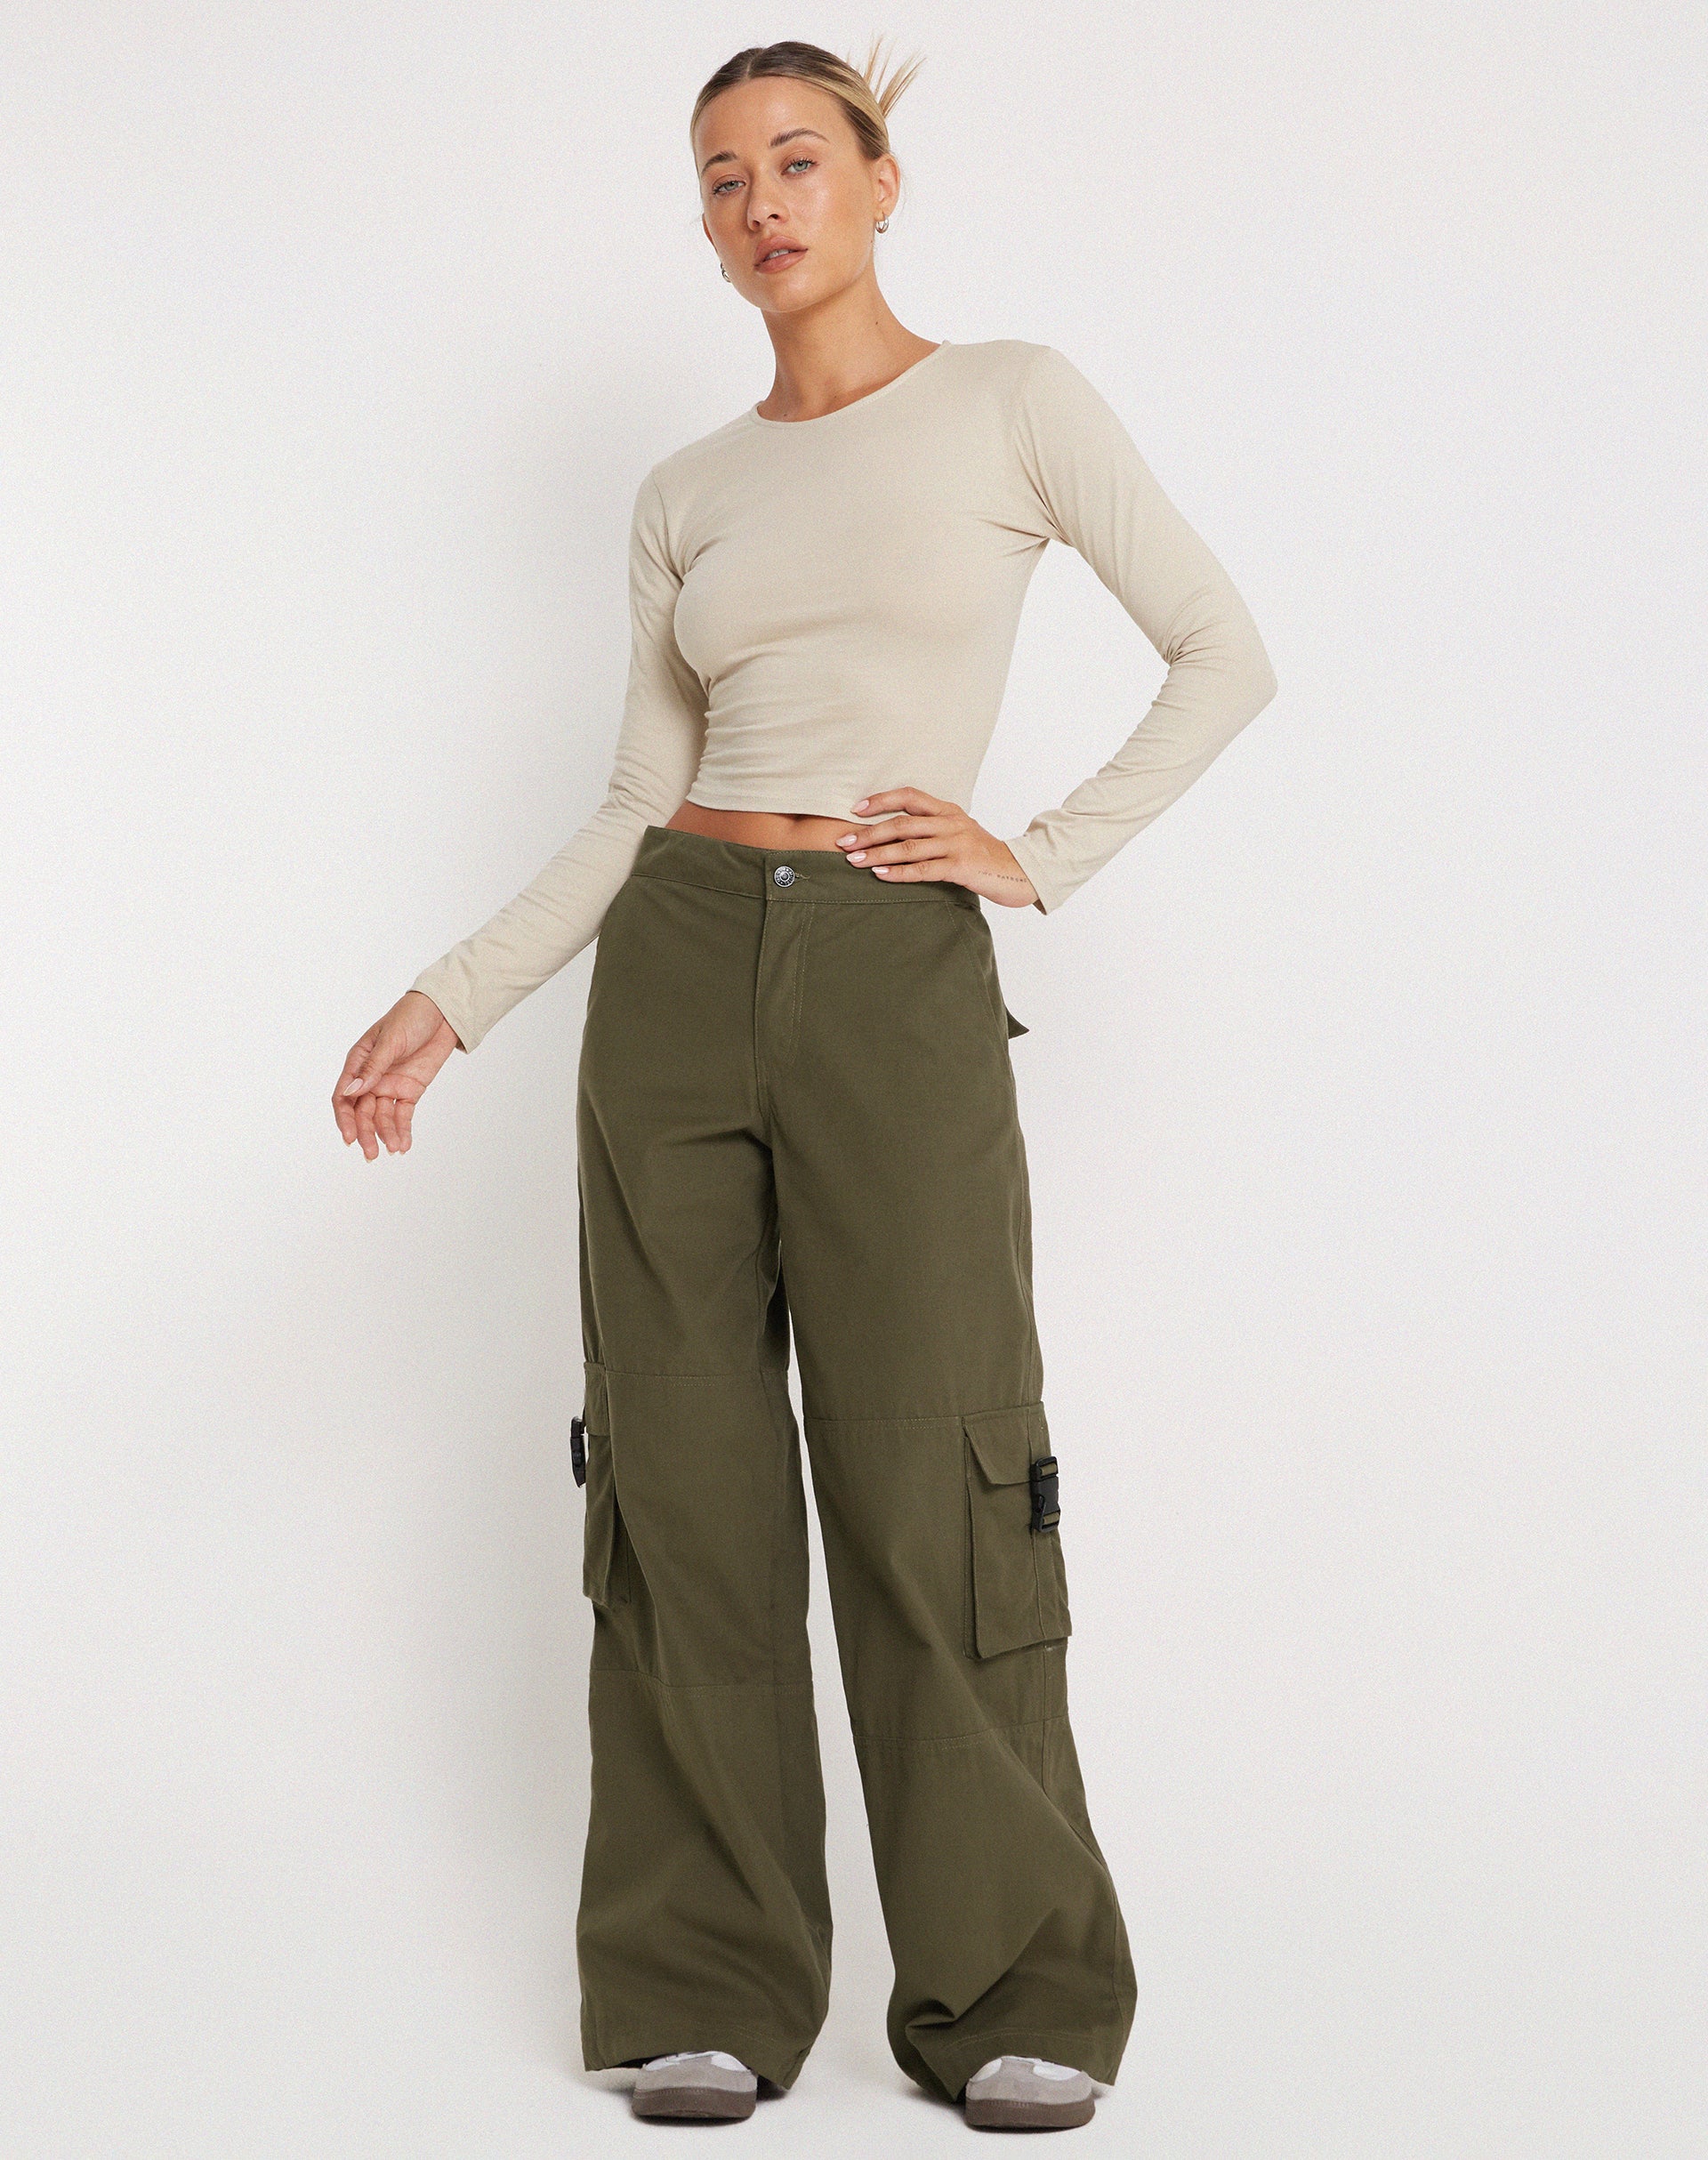 image of Freddy Low Rise Cargo Trouser in Military Khaki